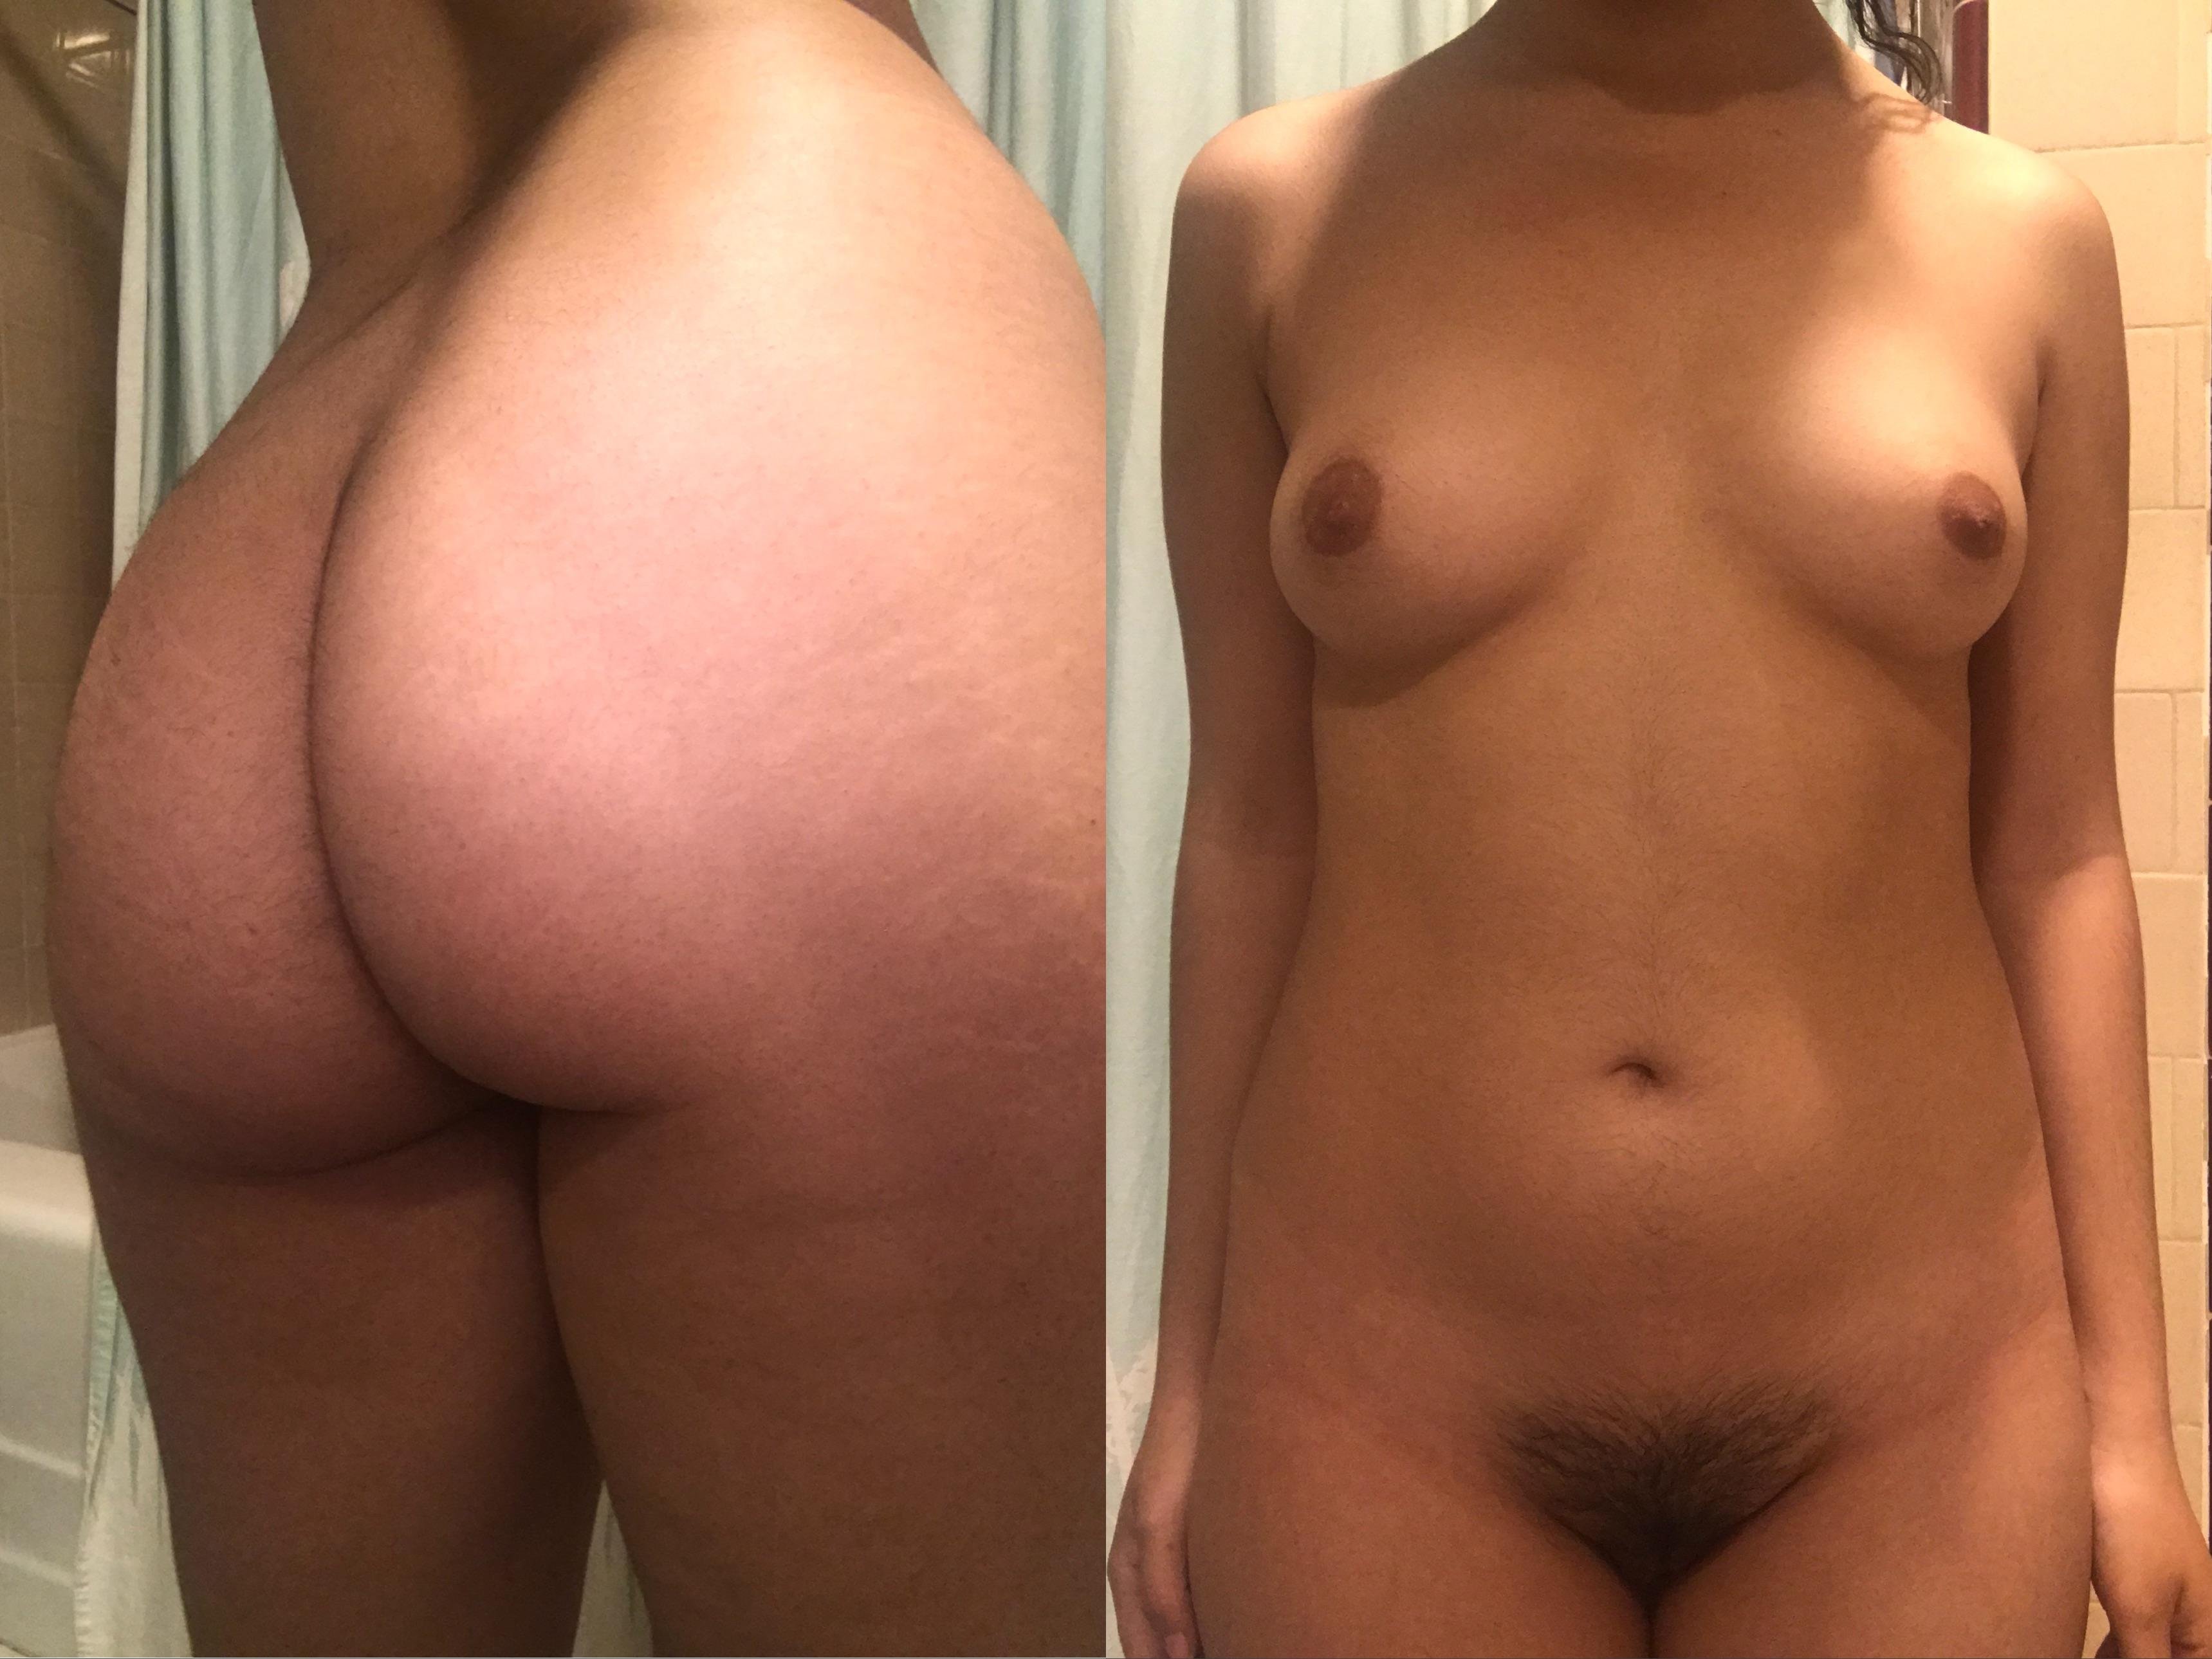 F/18/4’11/107 lbs...Always been insecure about my height, body hair, hip dips, and stretch marks